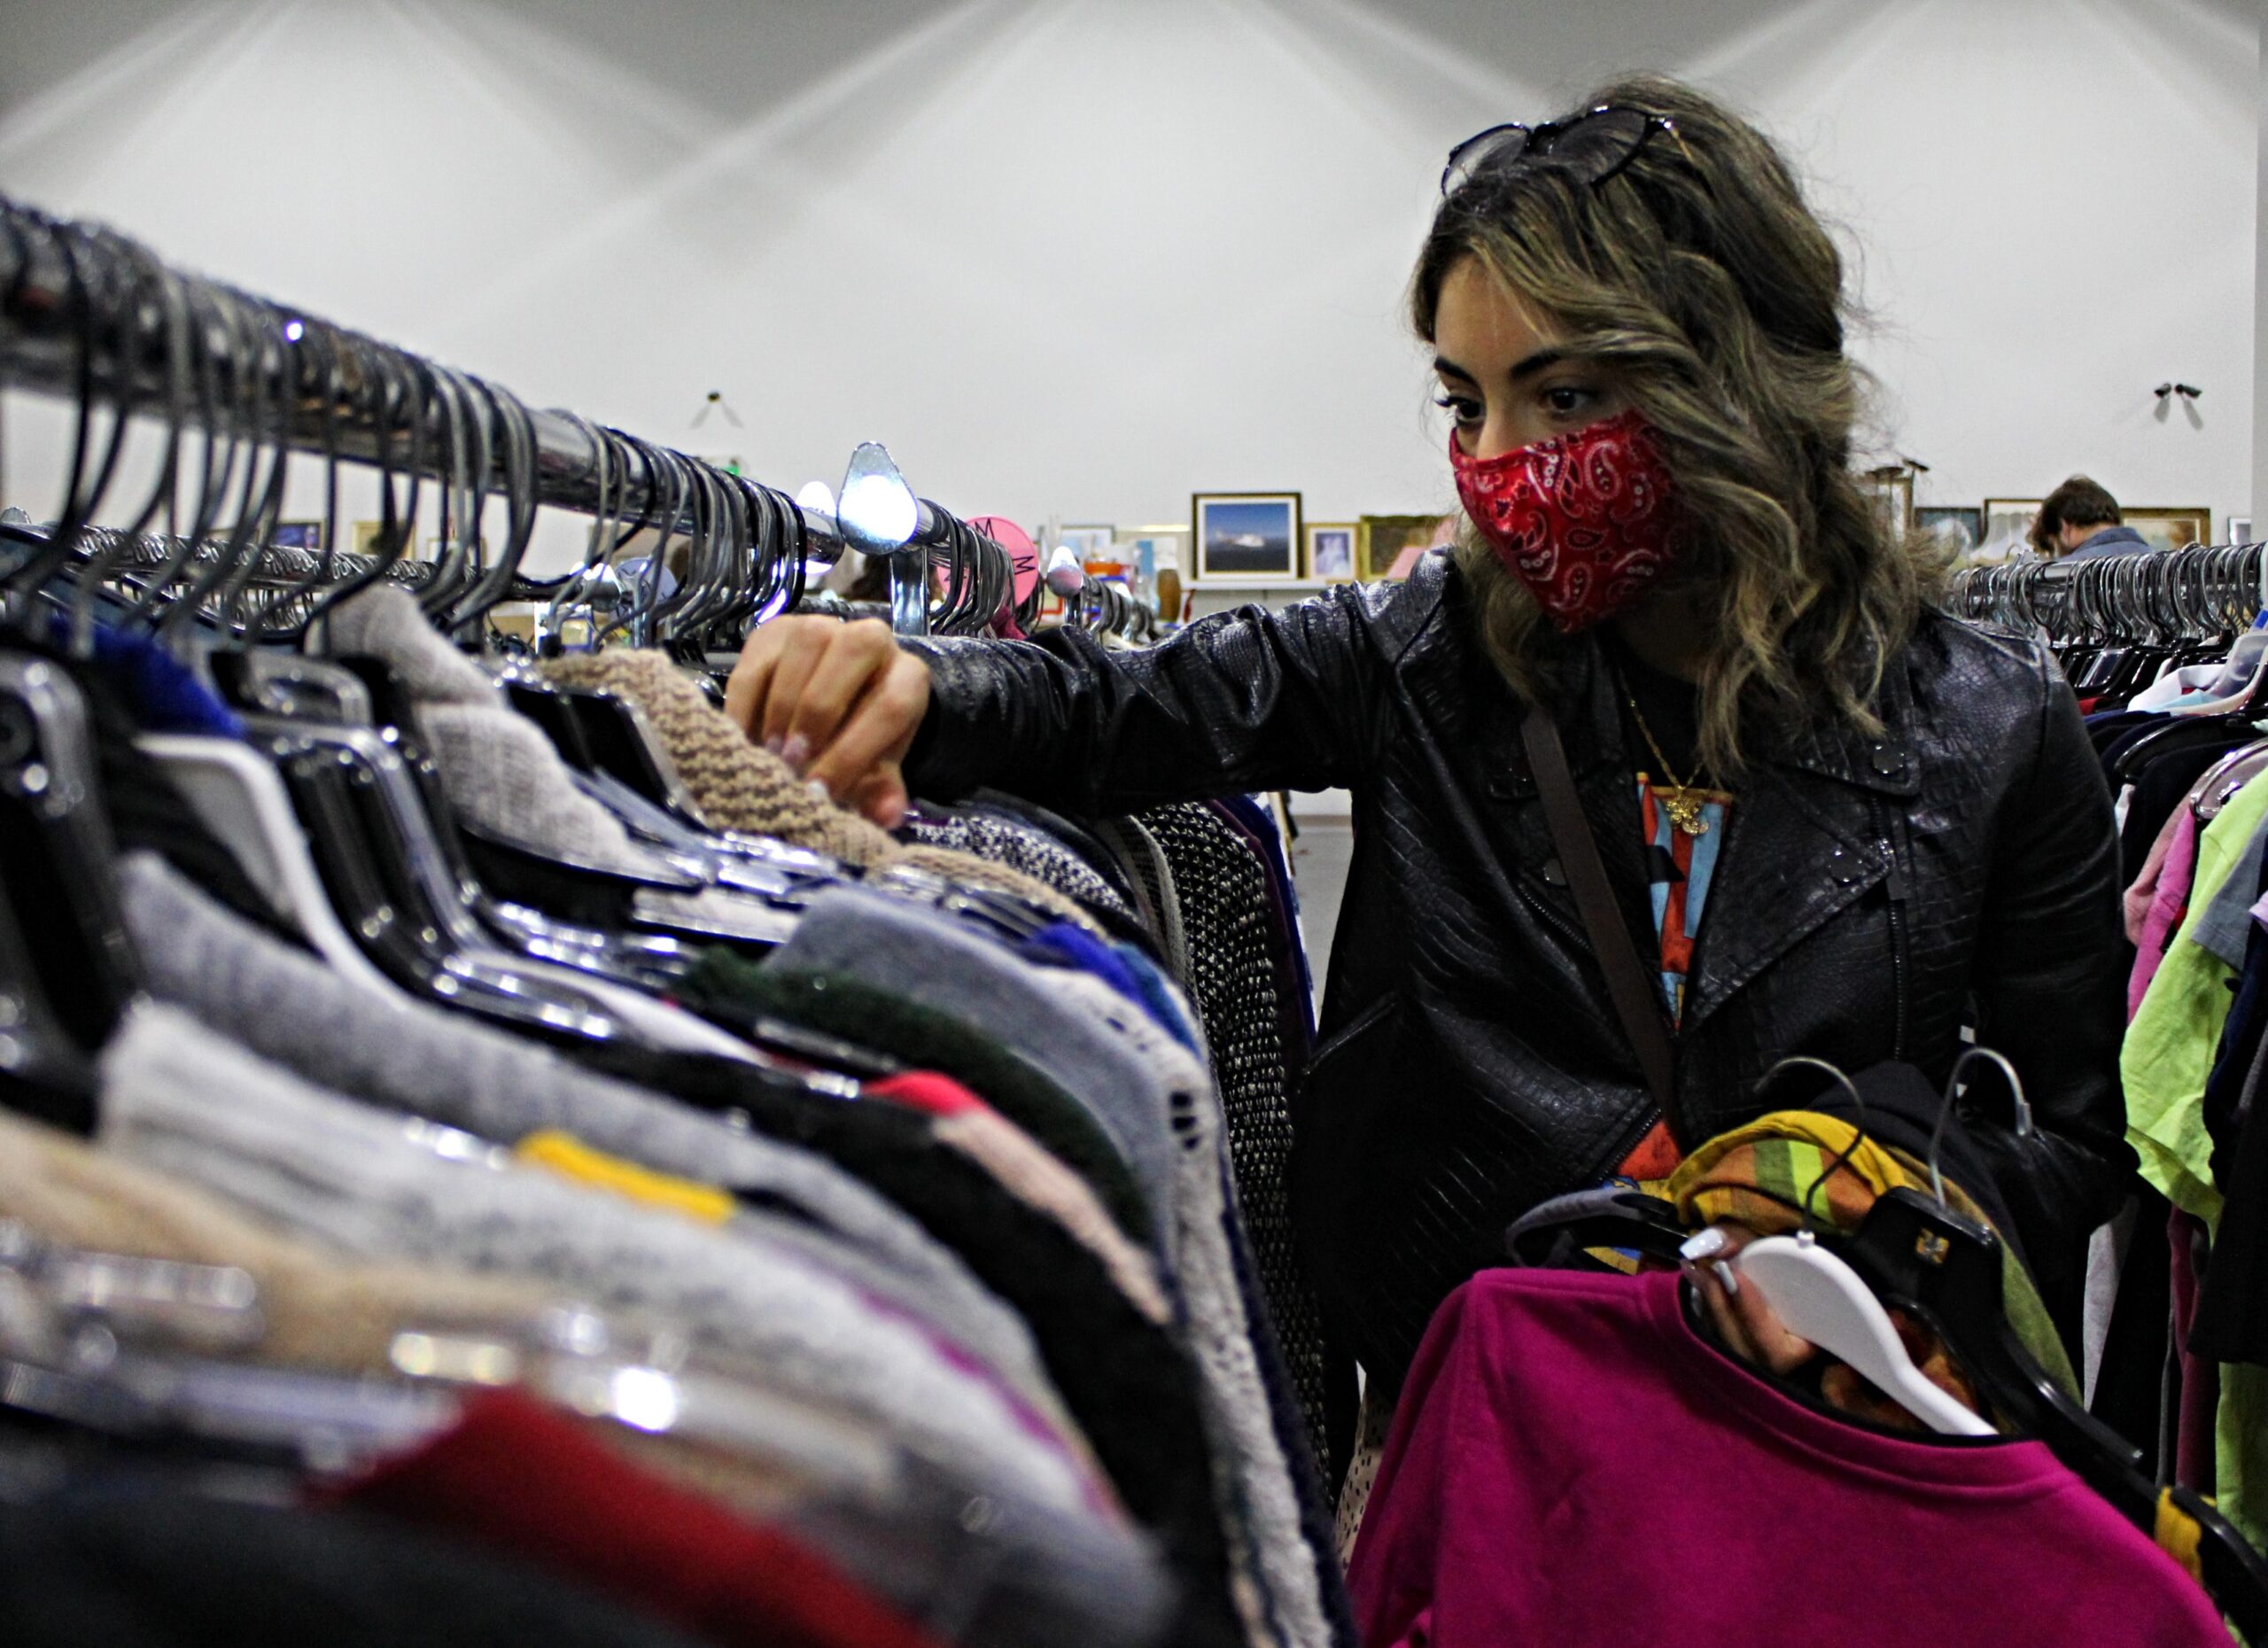 Marie Wasef started thrifting six years ago but has recently turned it into an online business. She spends hours a week picking apart local thrift stores hoping to find the right items to resell. Chantel Murrin/Kicker